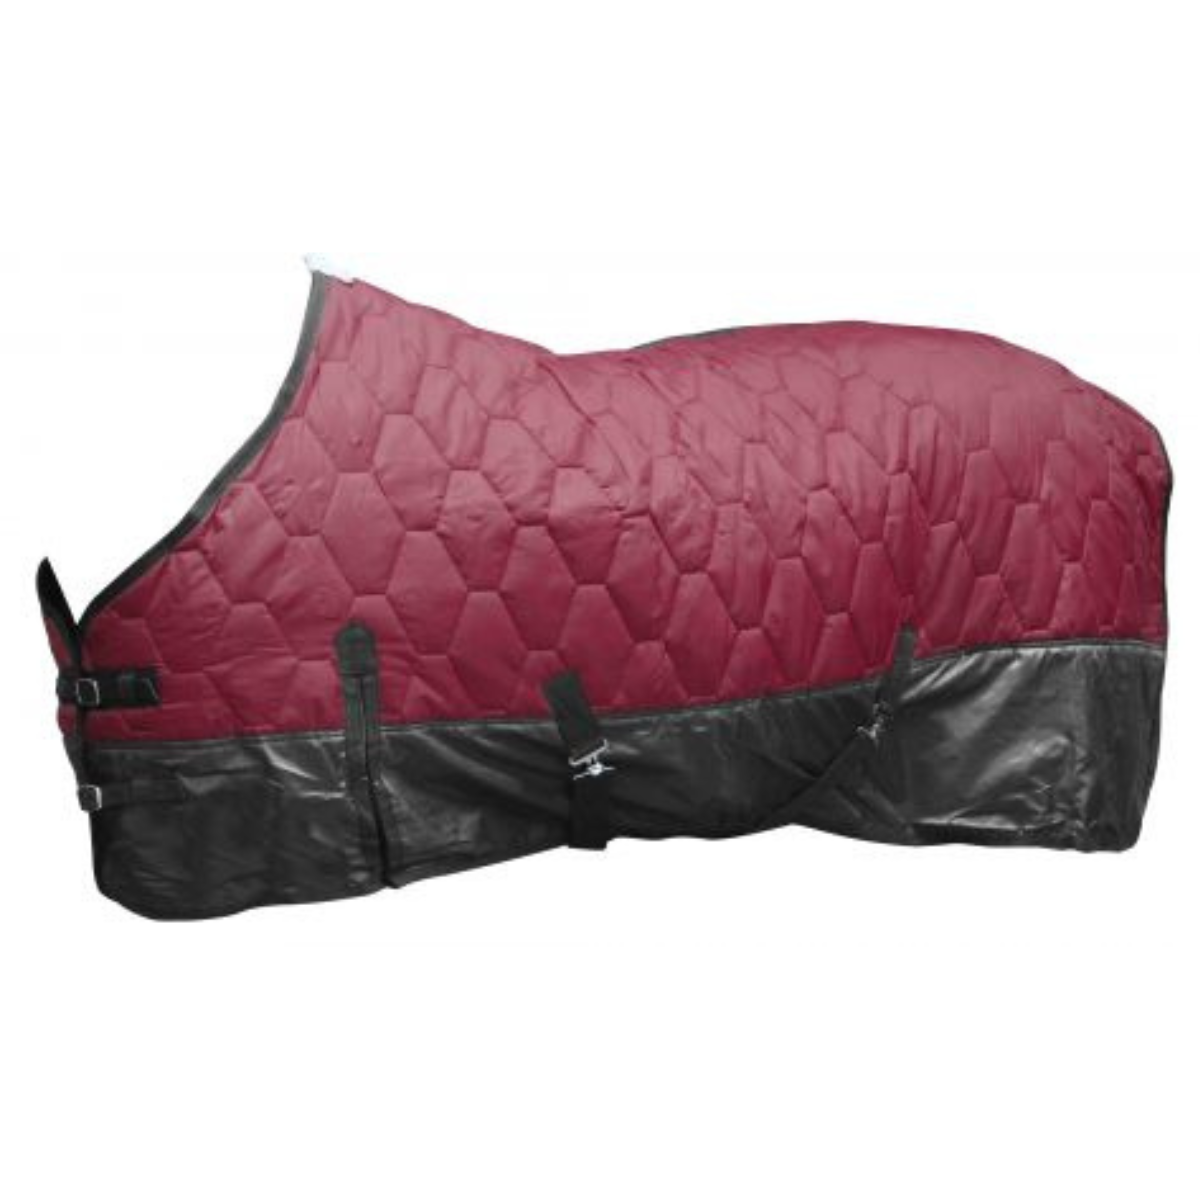 Showman ® 420 Denier Quilted Nylon Blanket is Constructed of 420 Denier Outer Shell with 70 Denier Rip Stop Lining and Nylon Bound Edges. - Double T Saddles